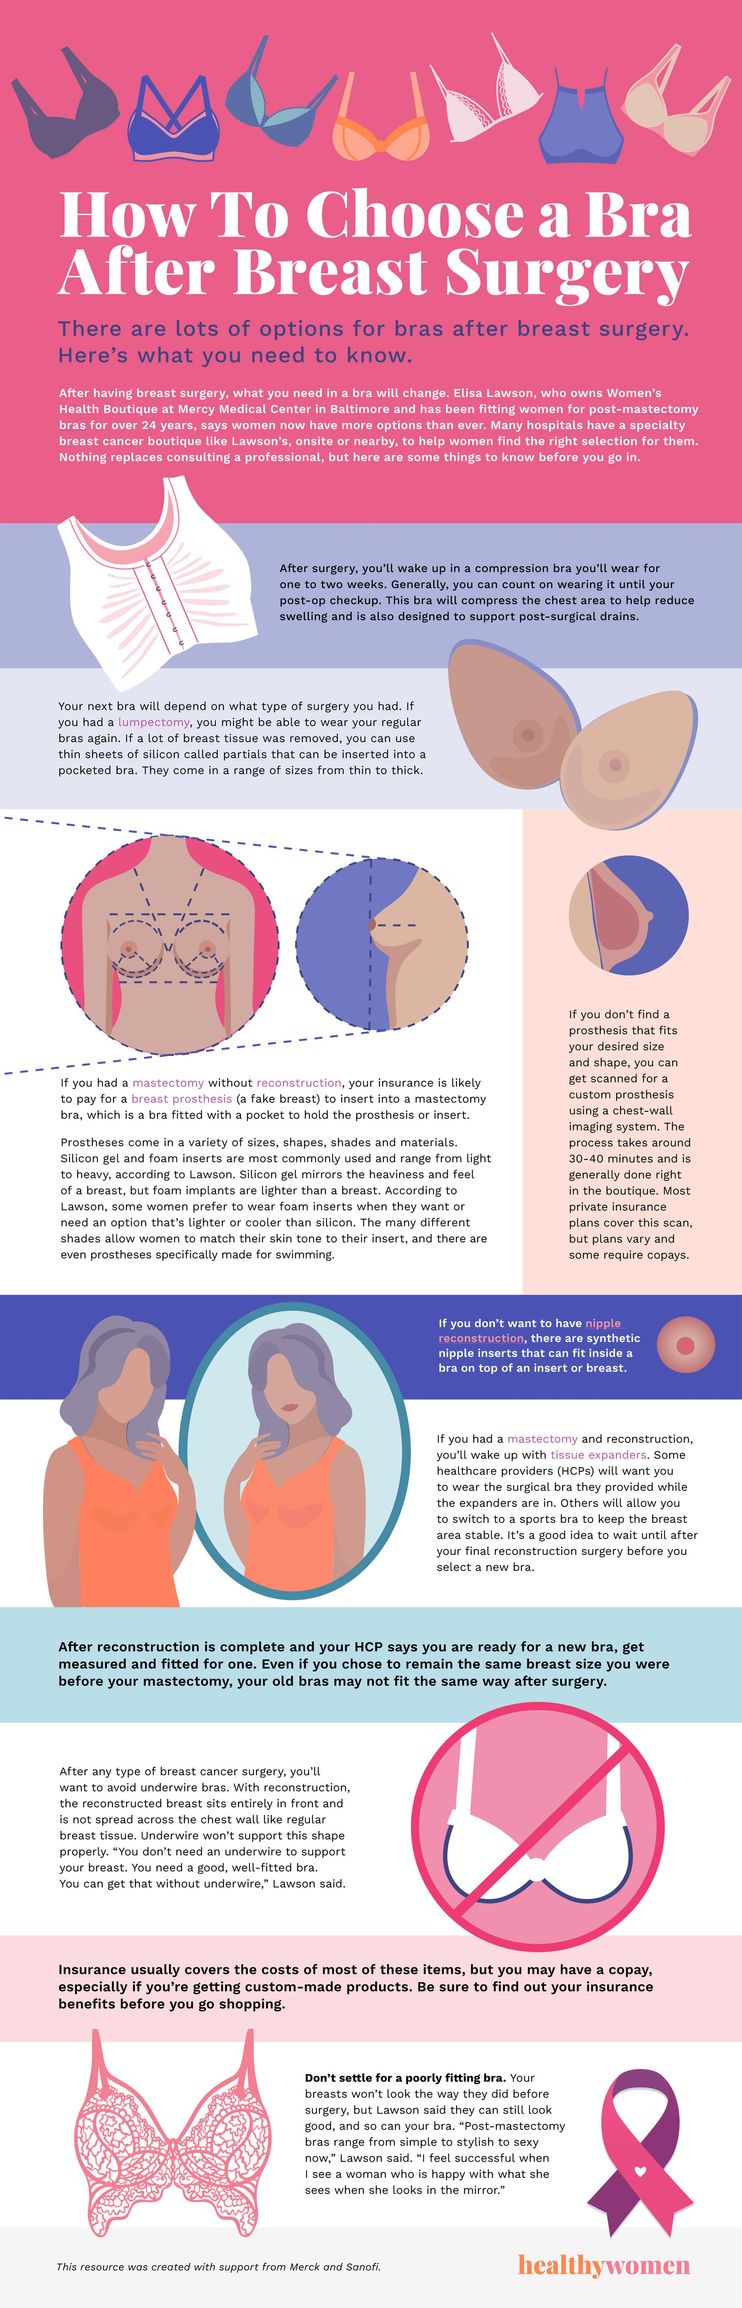 This Week's Top Stories: What Your Breast Shape Says about Your